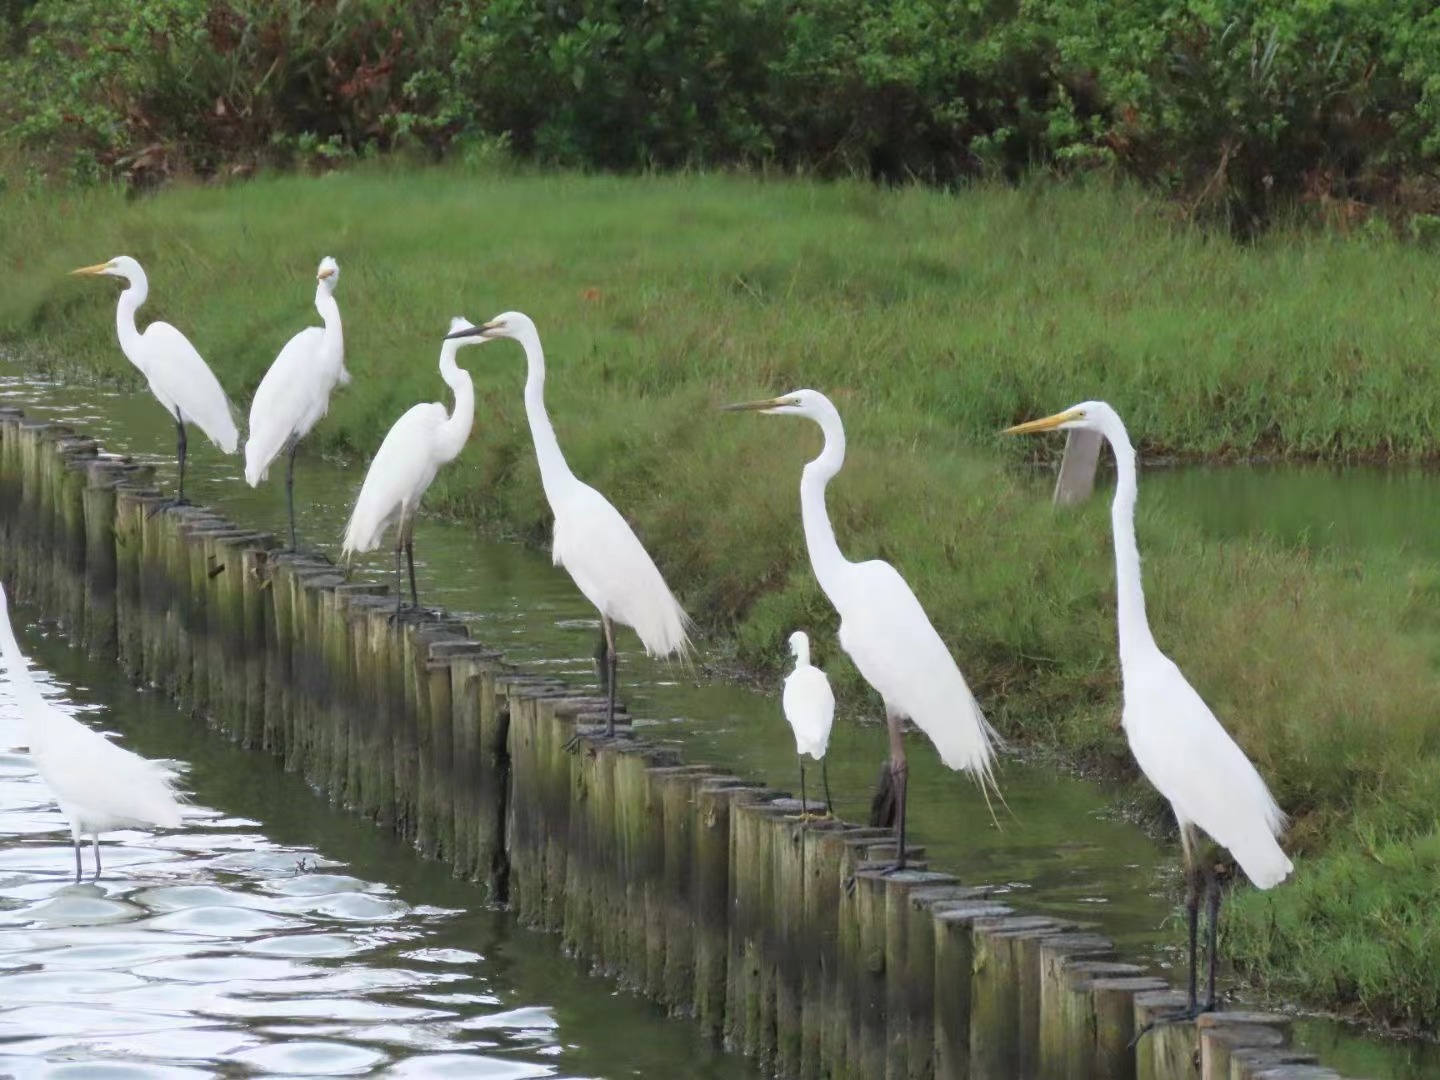 After the rain that continued for days, egrets line up around the lake to find food.